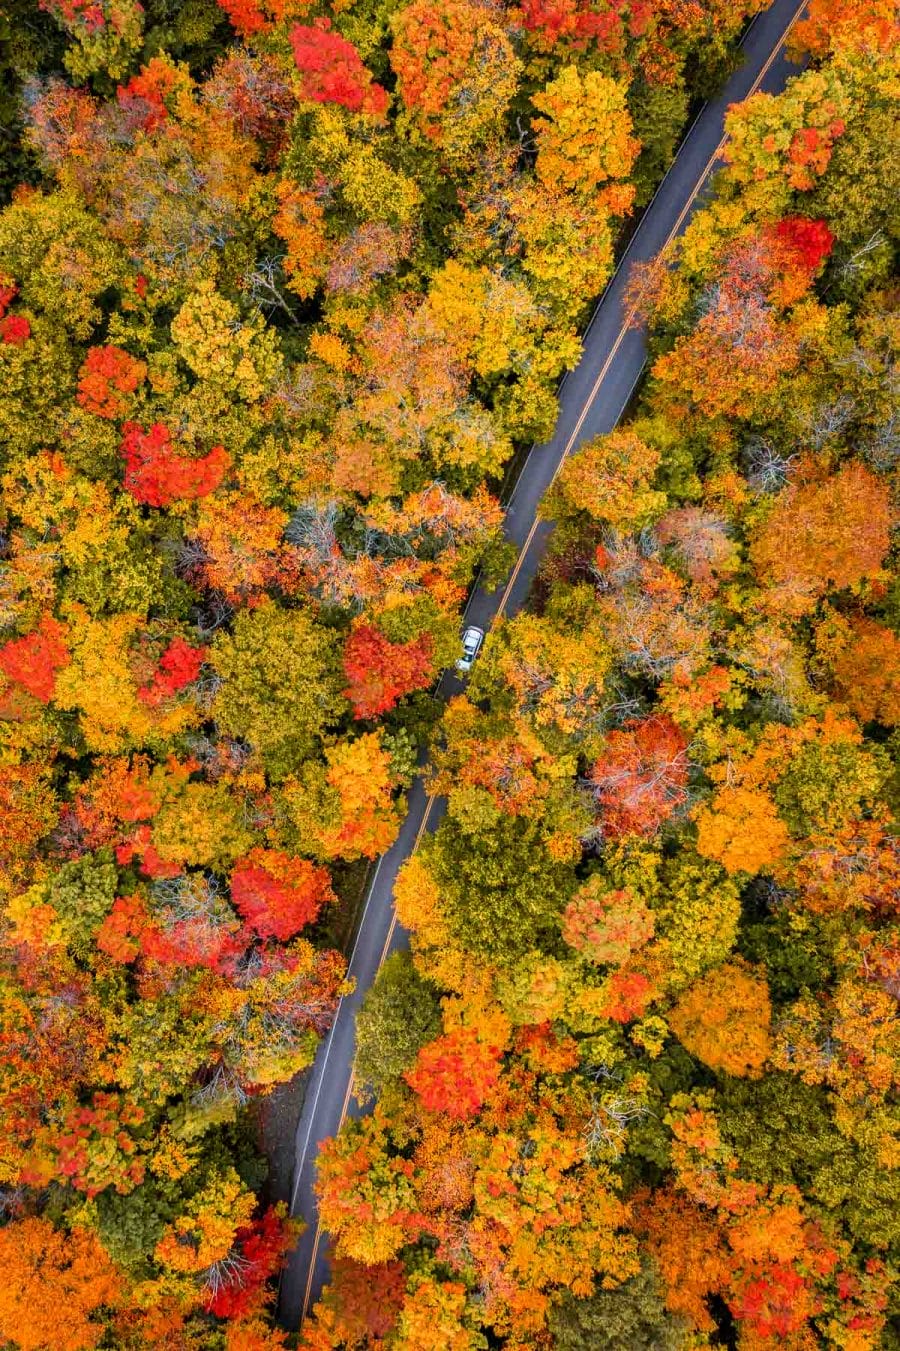 Smuggler's Notch in the Fall Foliage